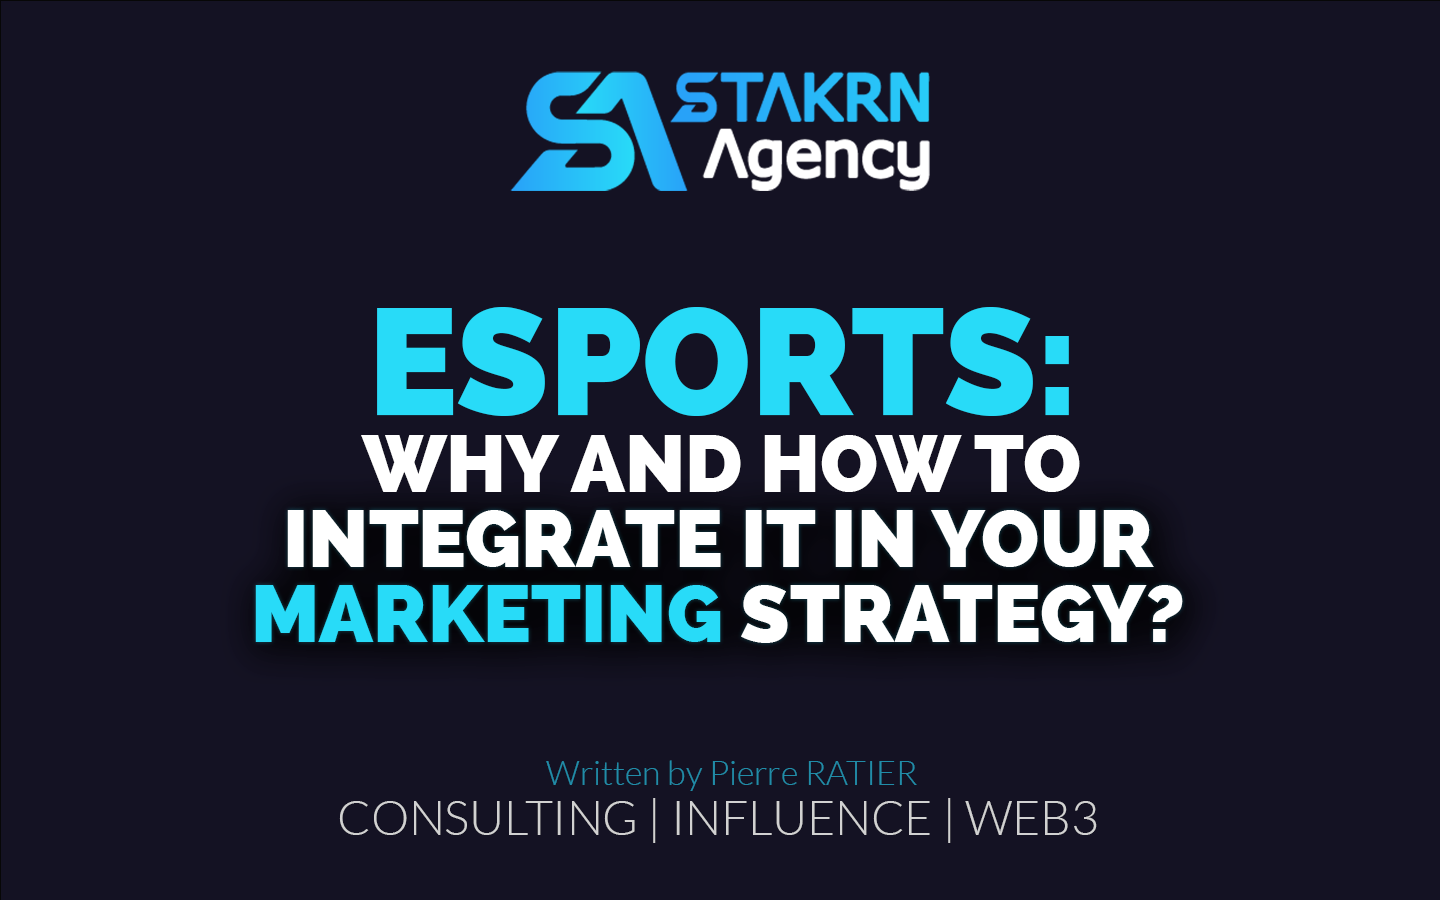 ESPORTS WHY & HOW TO INTEGRATE IT IN YOUR MARKETING STRATEGY